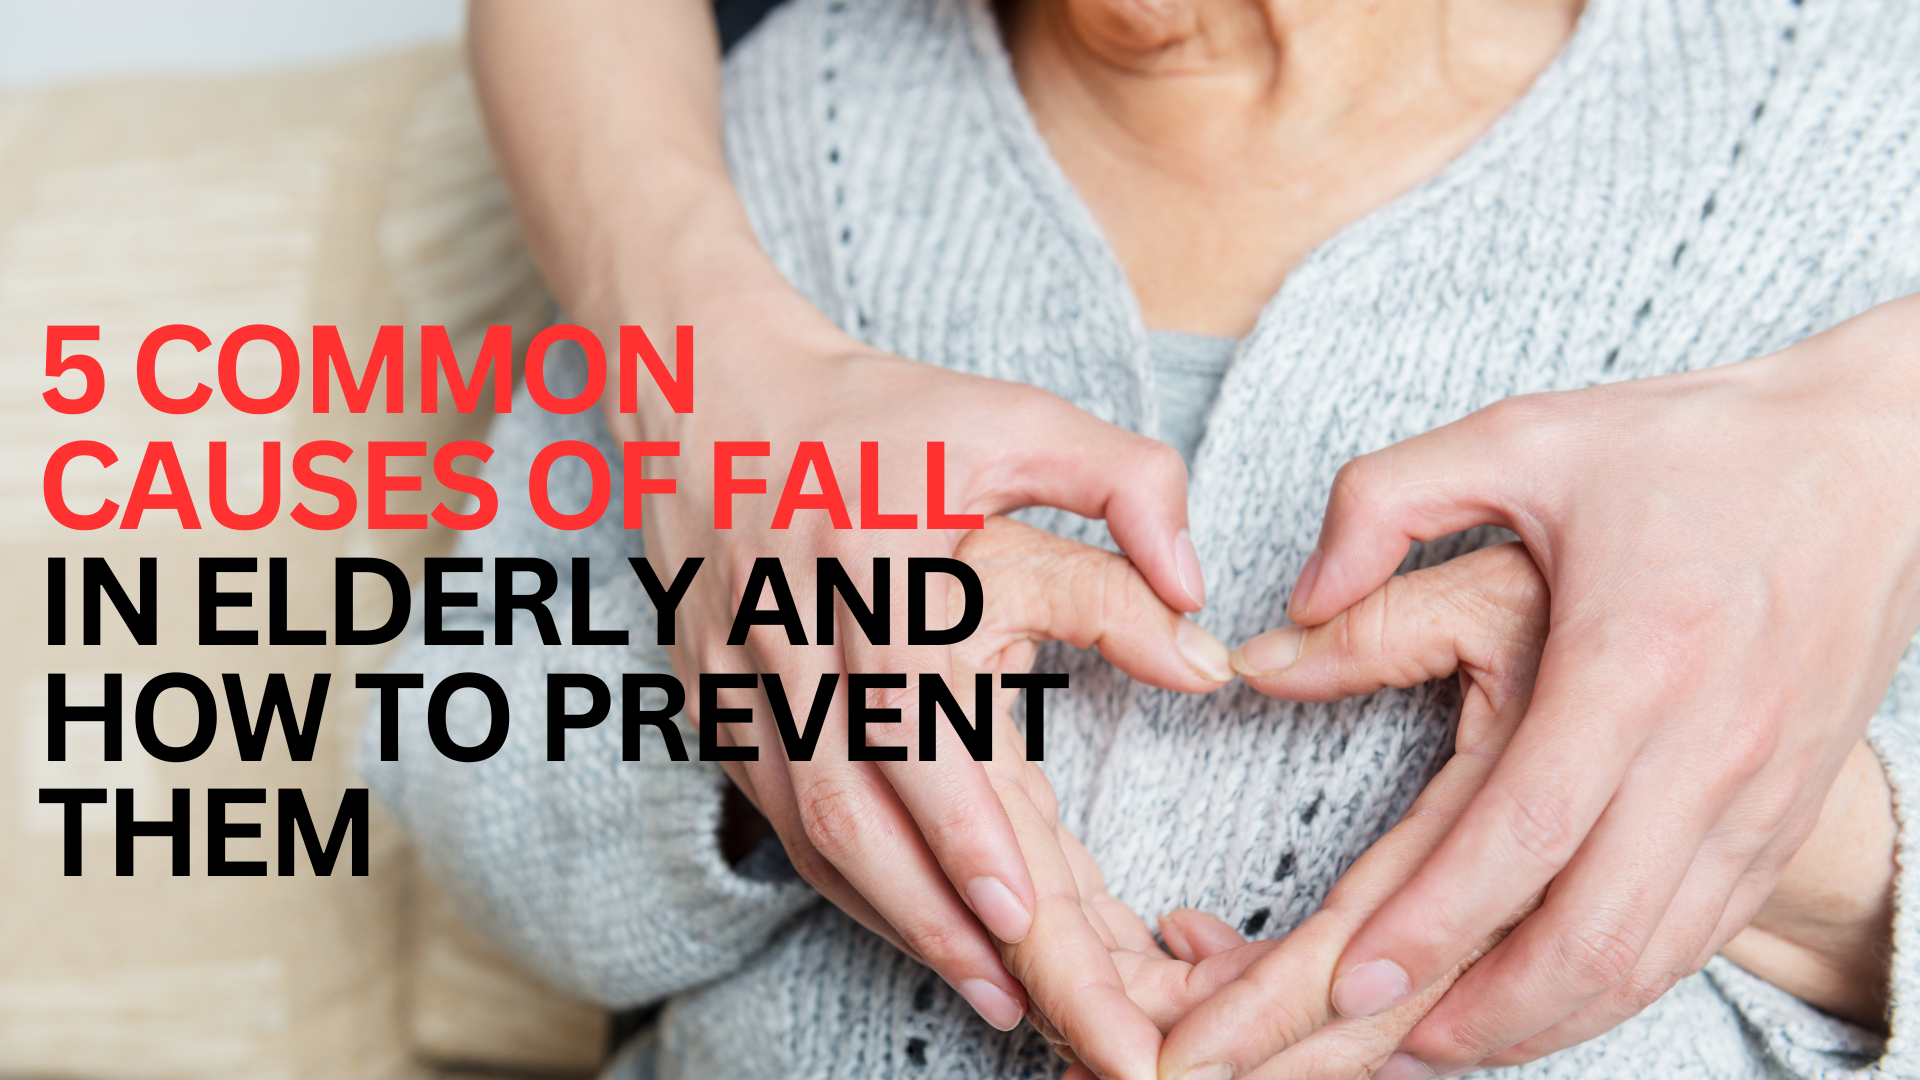 5 COMMON CAUSES OF FALL IN ELDERLY AND HOW TO PREVENT THEM